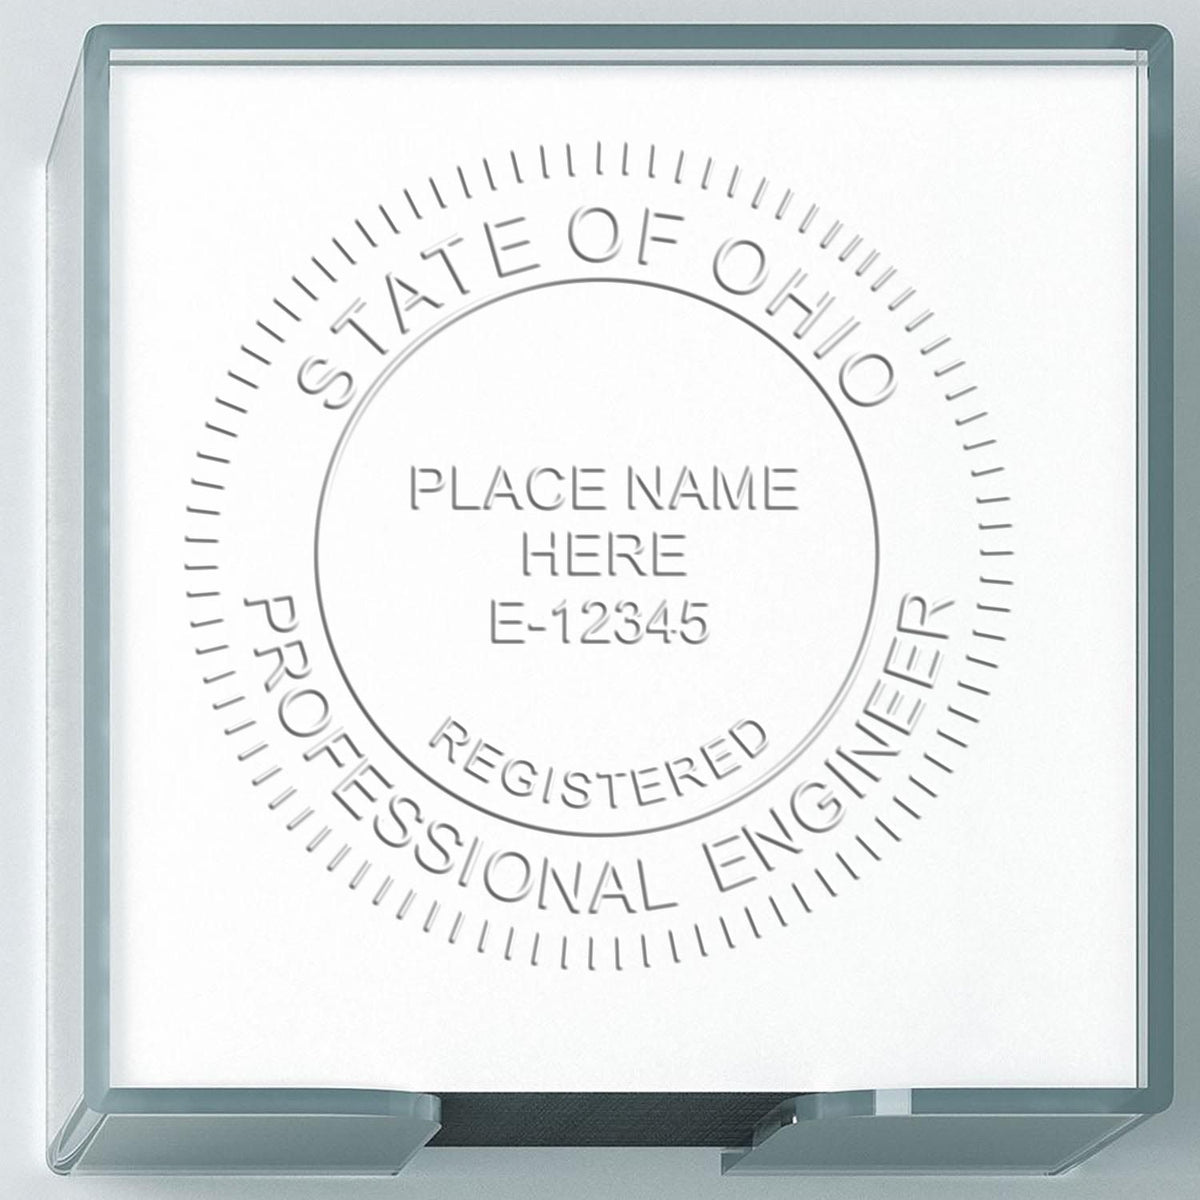 An alternative view of the State of Ohio Extended Long Reach Engineer Seal stamped on a sheet of paper showing the image in use